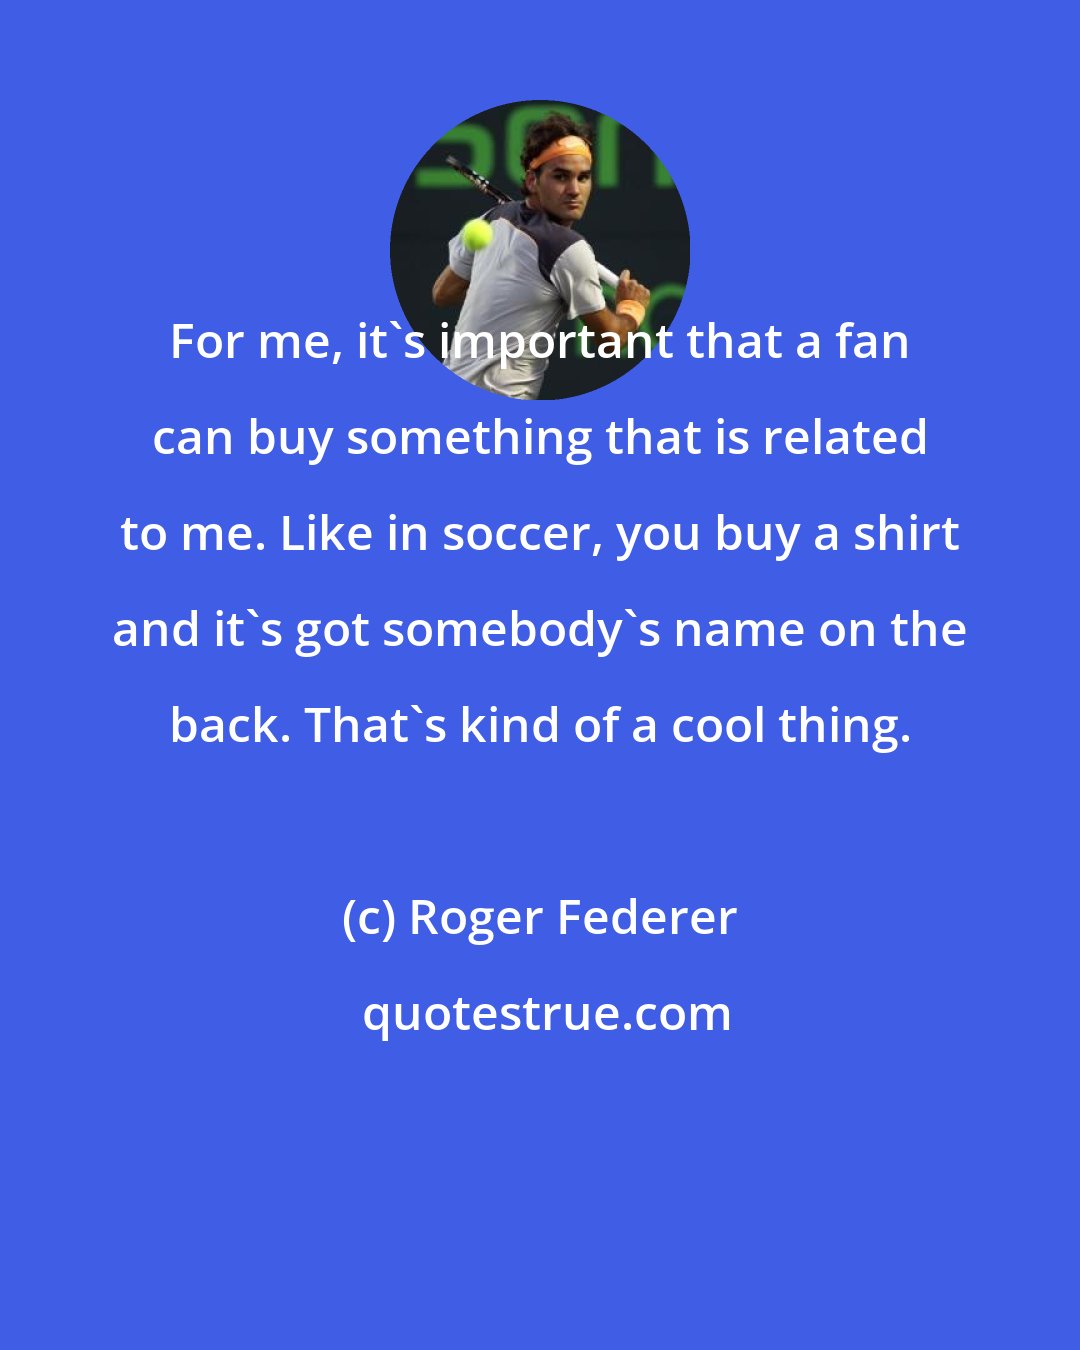 Roger Federer: For me, it's important that a fan can buy something that is related to me. Like in soccer, you buy a shirt and it's got somebody's name on the back. That's kind of a cool thing.